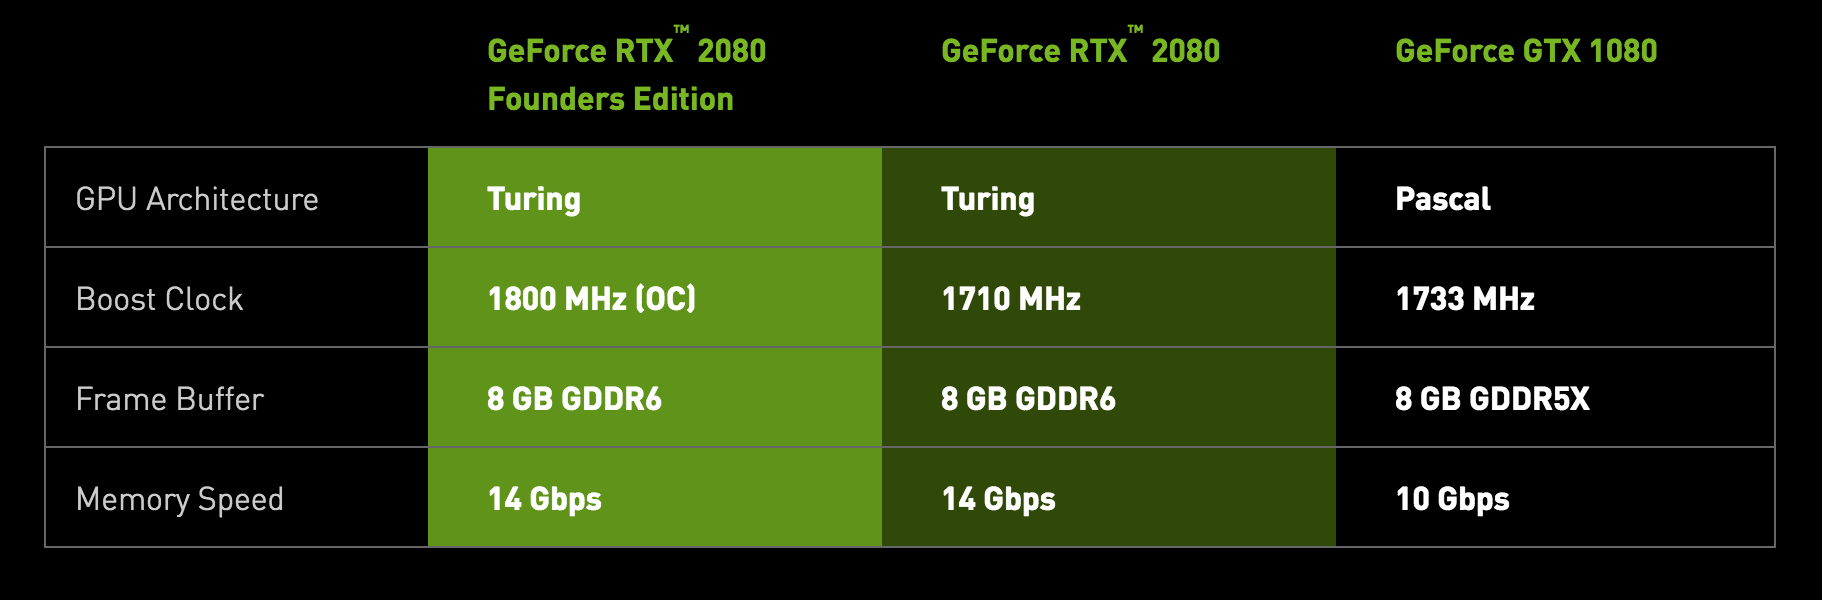 Nvidia GeForce RTX 2080 release date, news and features - Gigarefurb ...